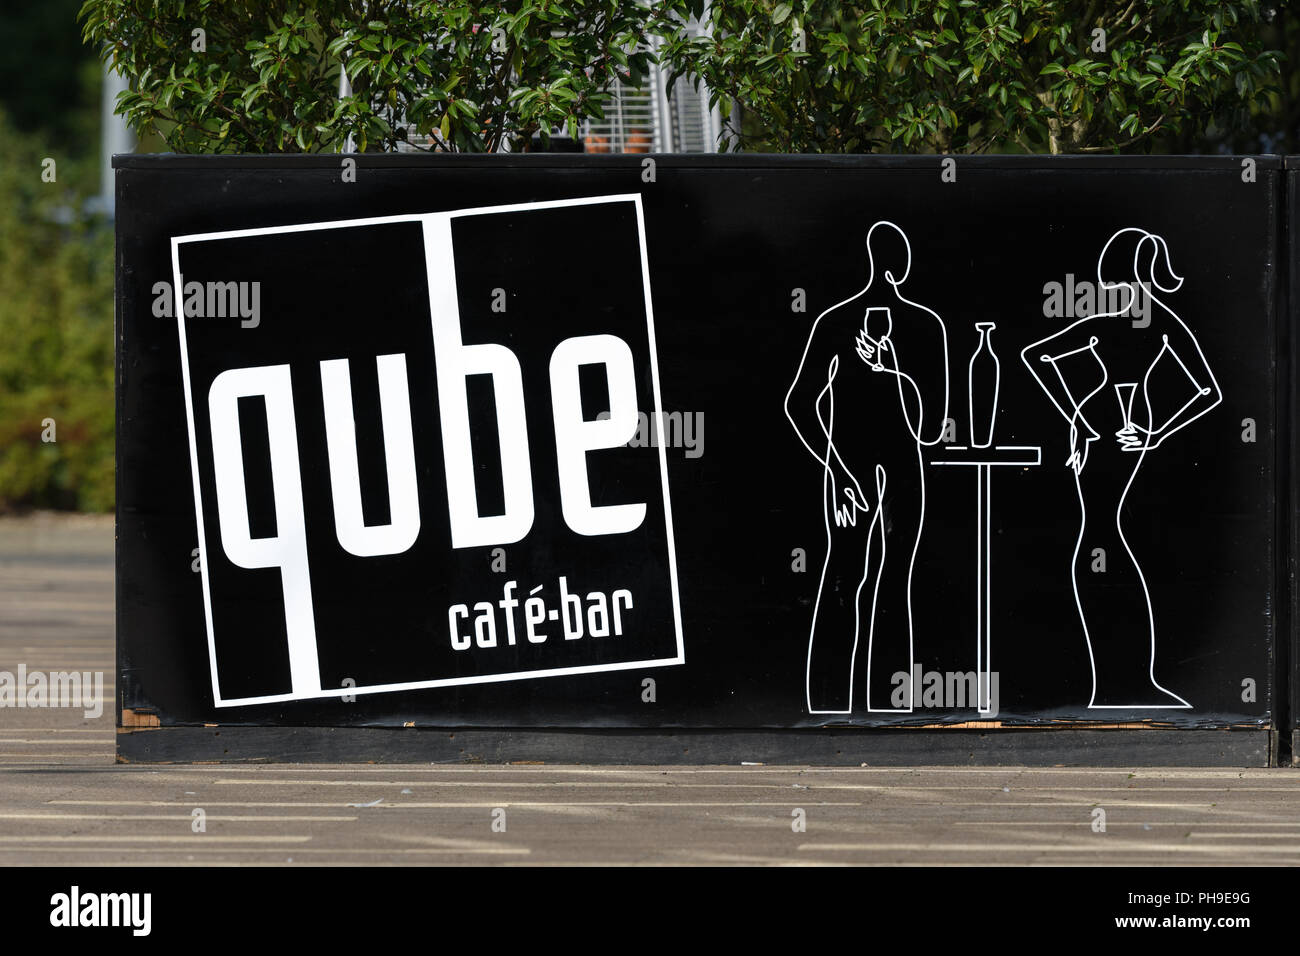 The Qube cafe bar at the Cube Council  building in the town centre of Corby, Easts Midlands, England. Stock Photo